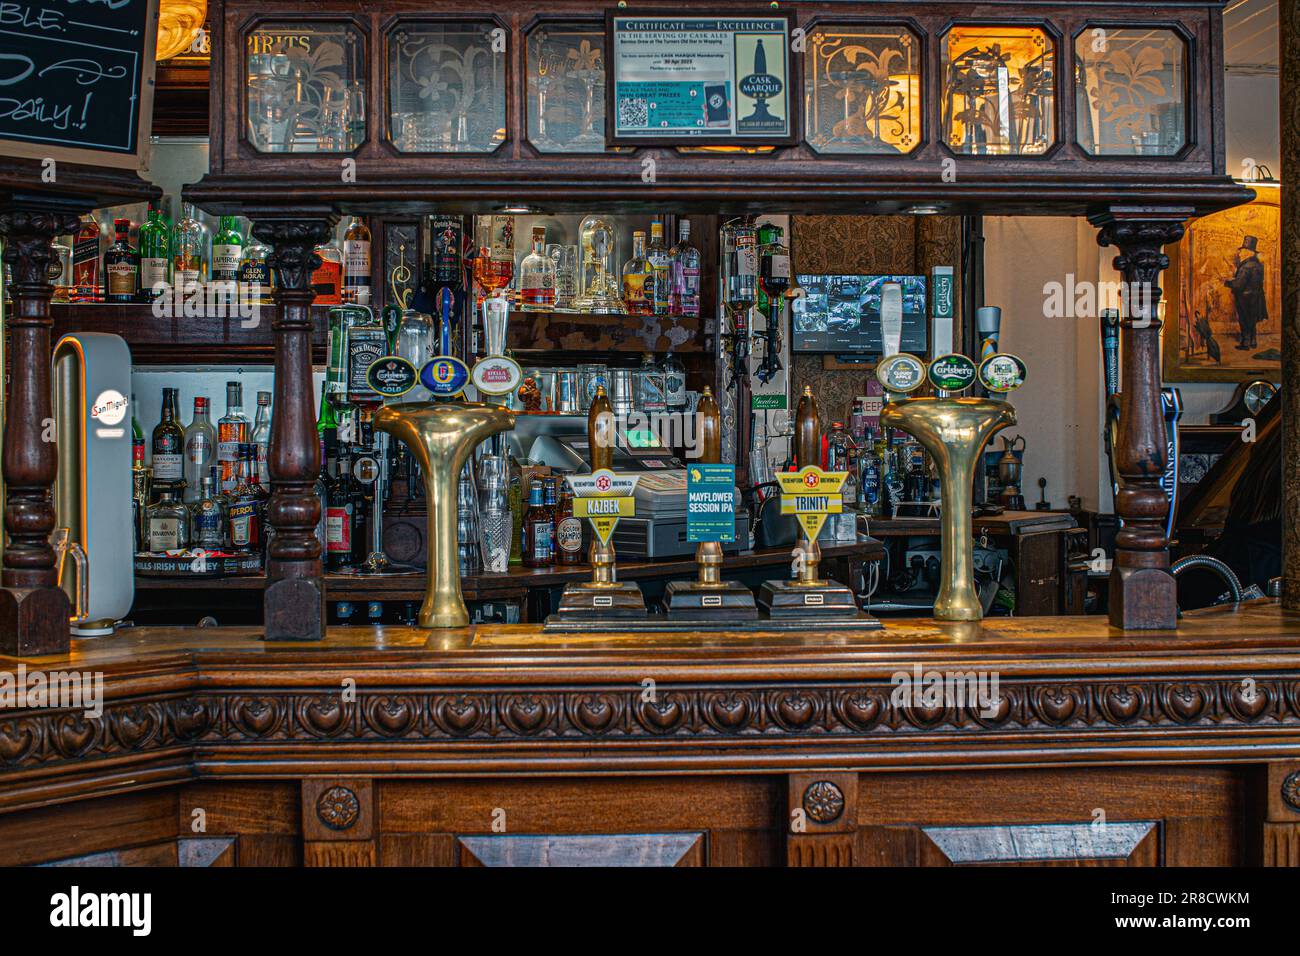 Bar interior of the Turners Old Star pub in Wapping, London, UK Stock Photo